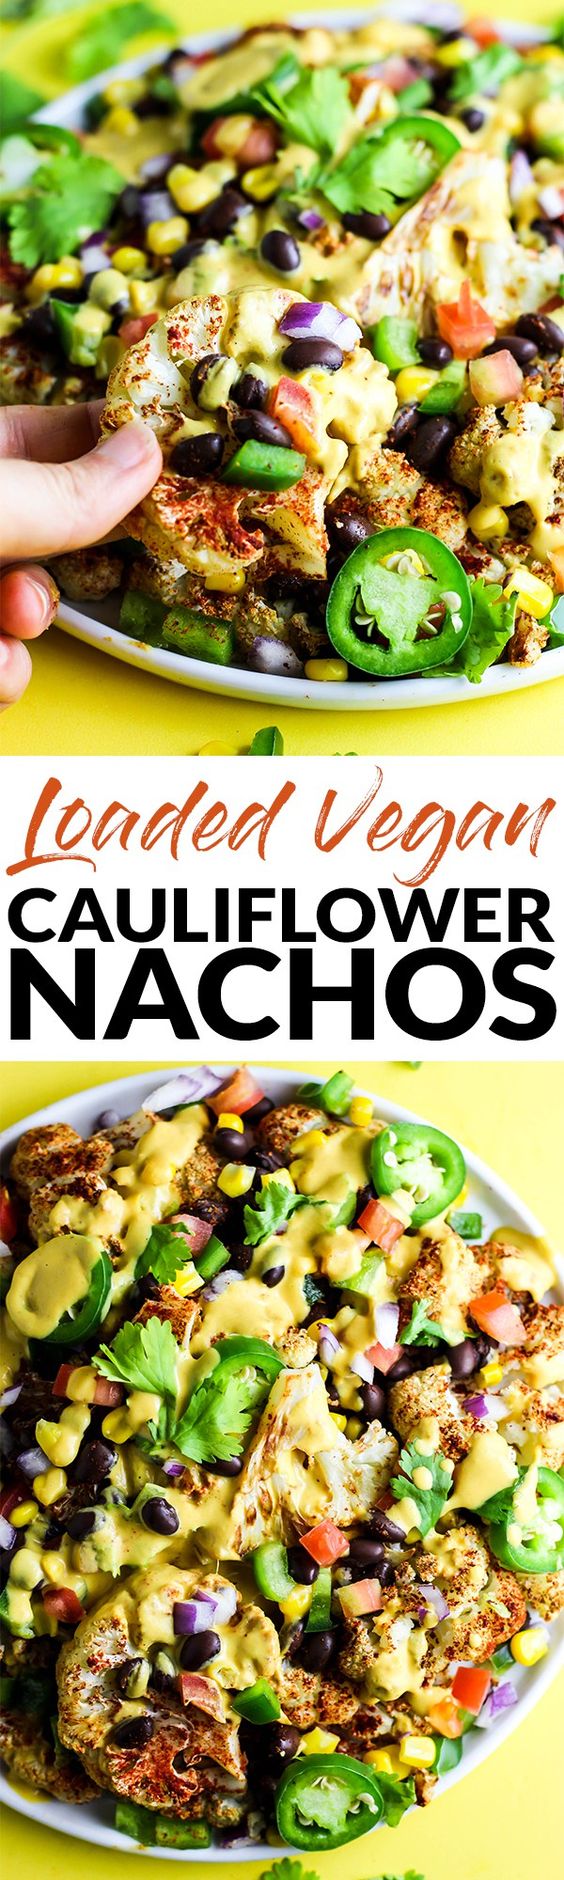 Not only are these vegan Loaded Cauliflower Nachos great for a party, but they're simple enough for a weeknight meal! Don't forget the creamy cashew queso. @lovemysilk #TastesLikeBetter #ad